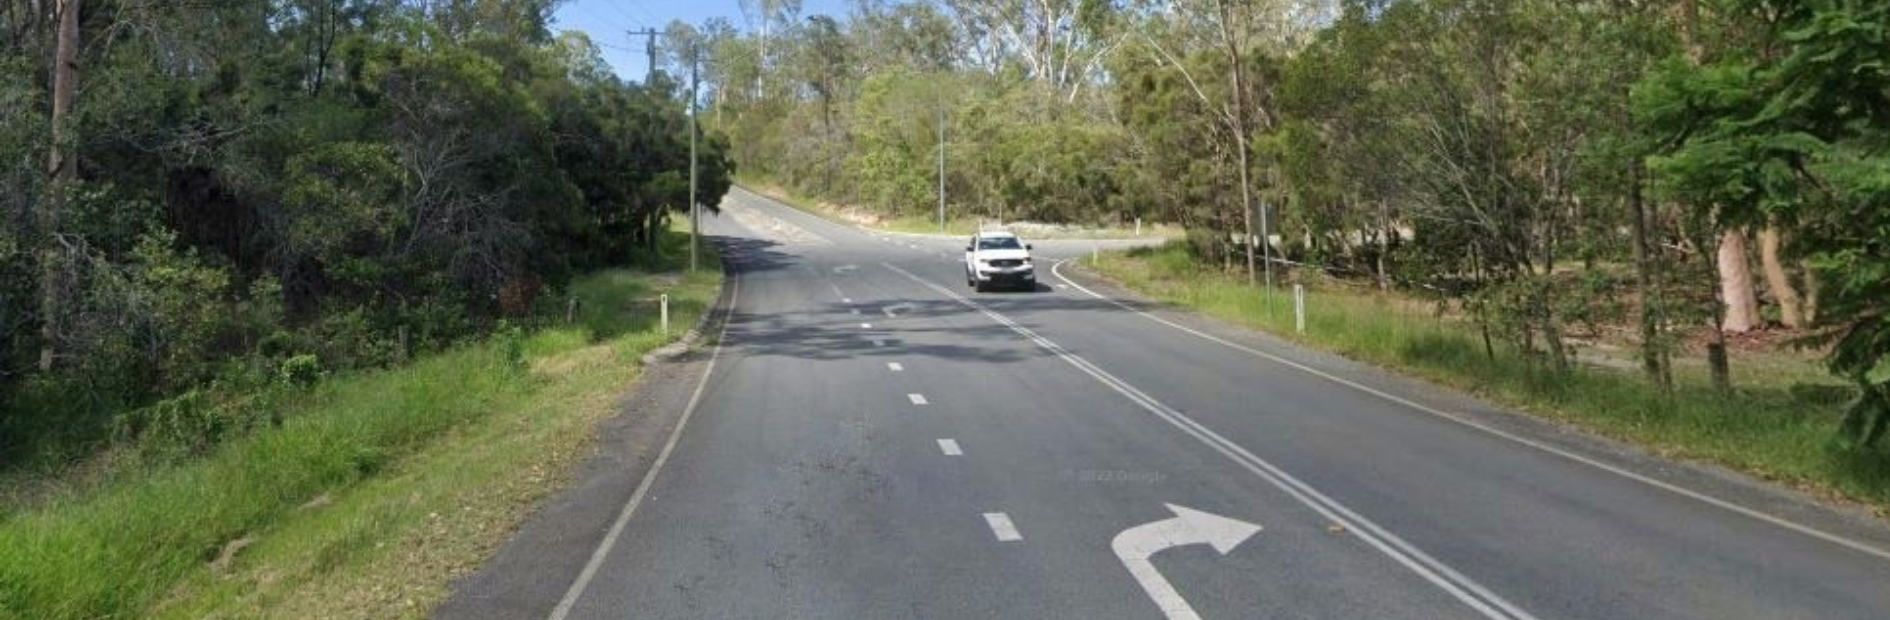 A car driving on a road with trees on both sides on Edelsten Road